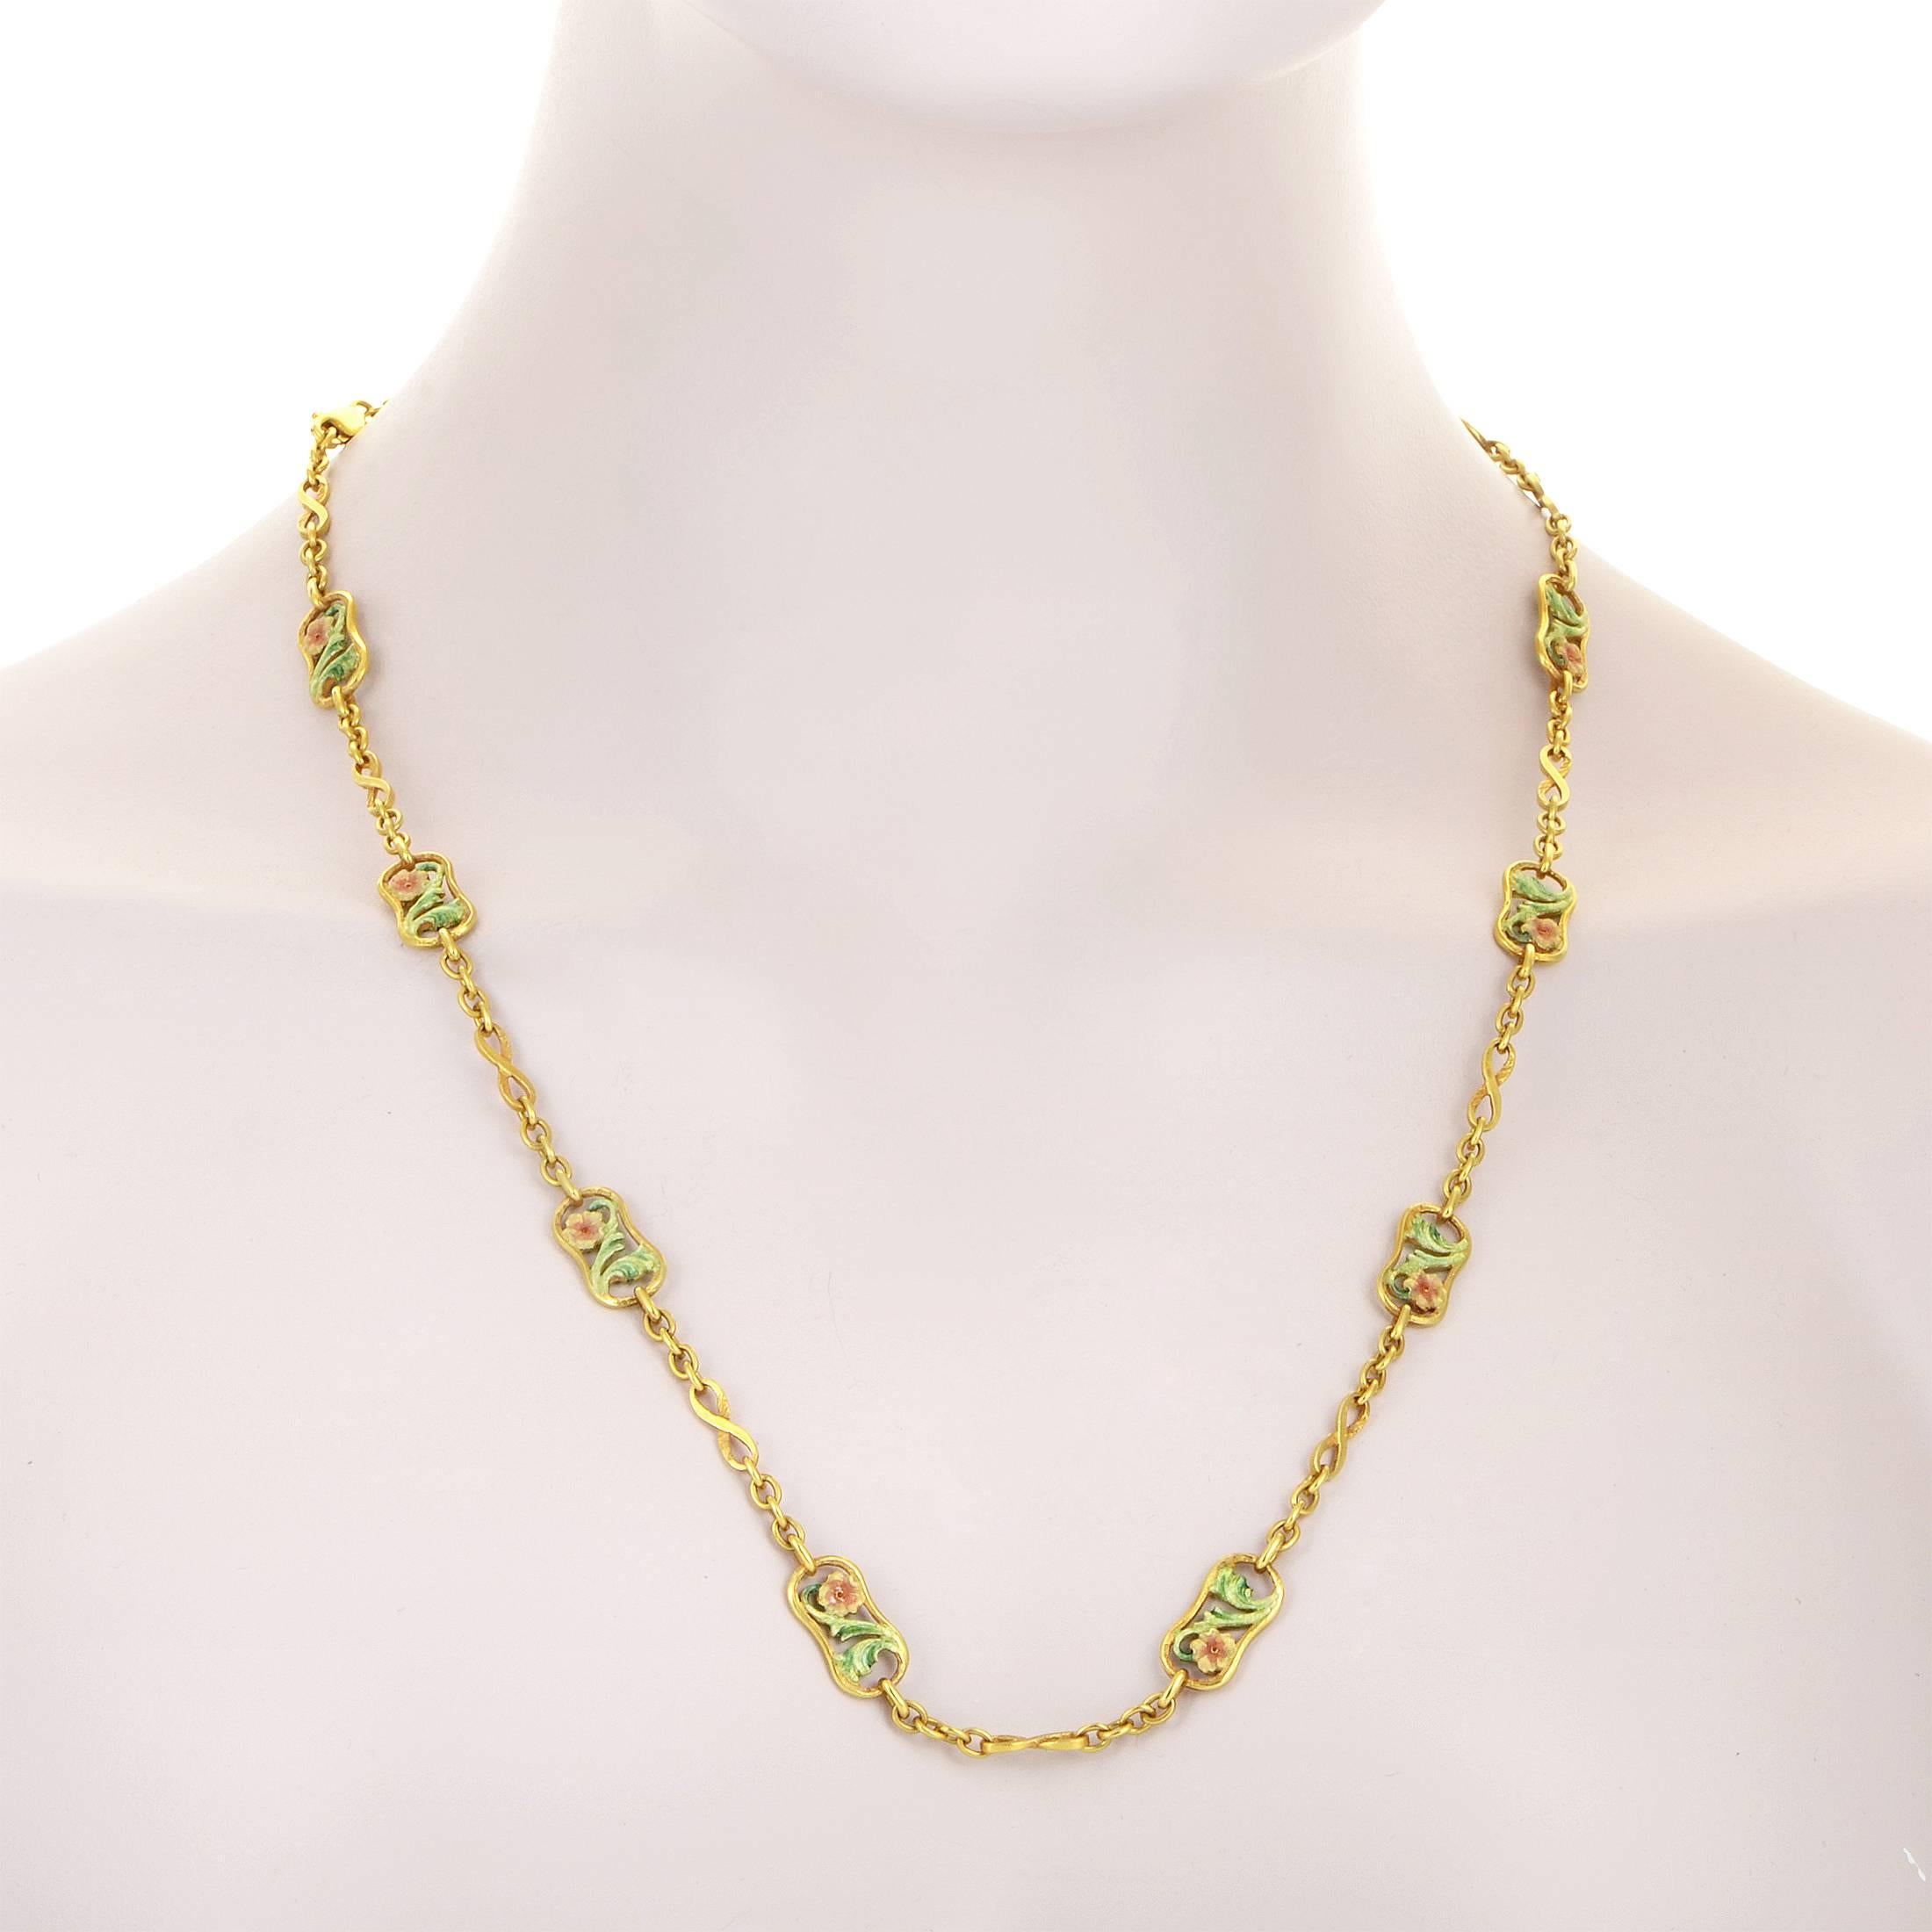 Employing colorful and masterfully applied enamel to realistically translate the vivacious beauty of flowers into an elegant and subtle design, Masriera created this fantastic 18K yellow gold necklace with nifty charms all along its length.
Charm